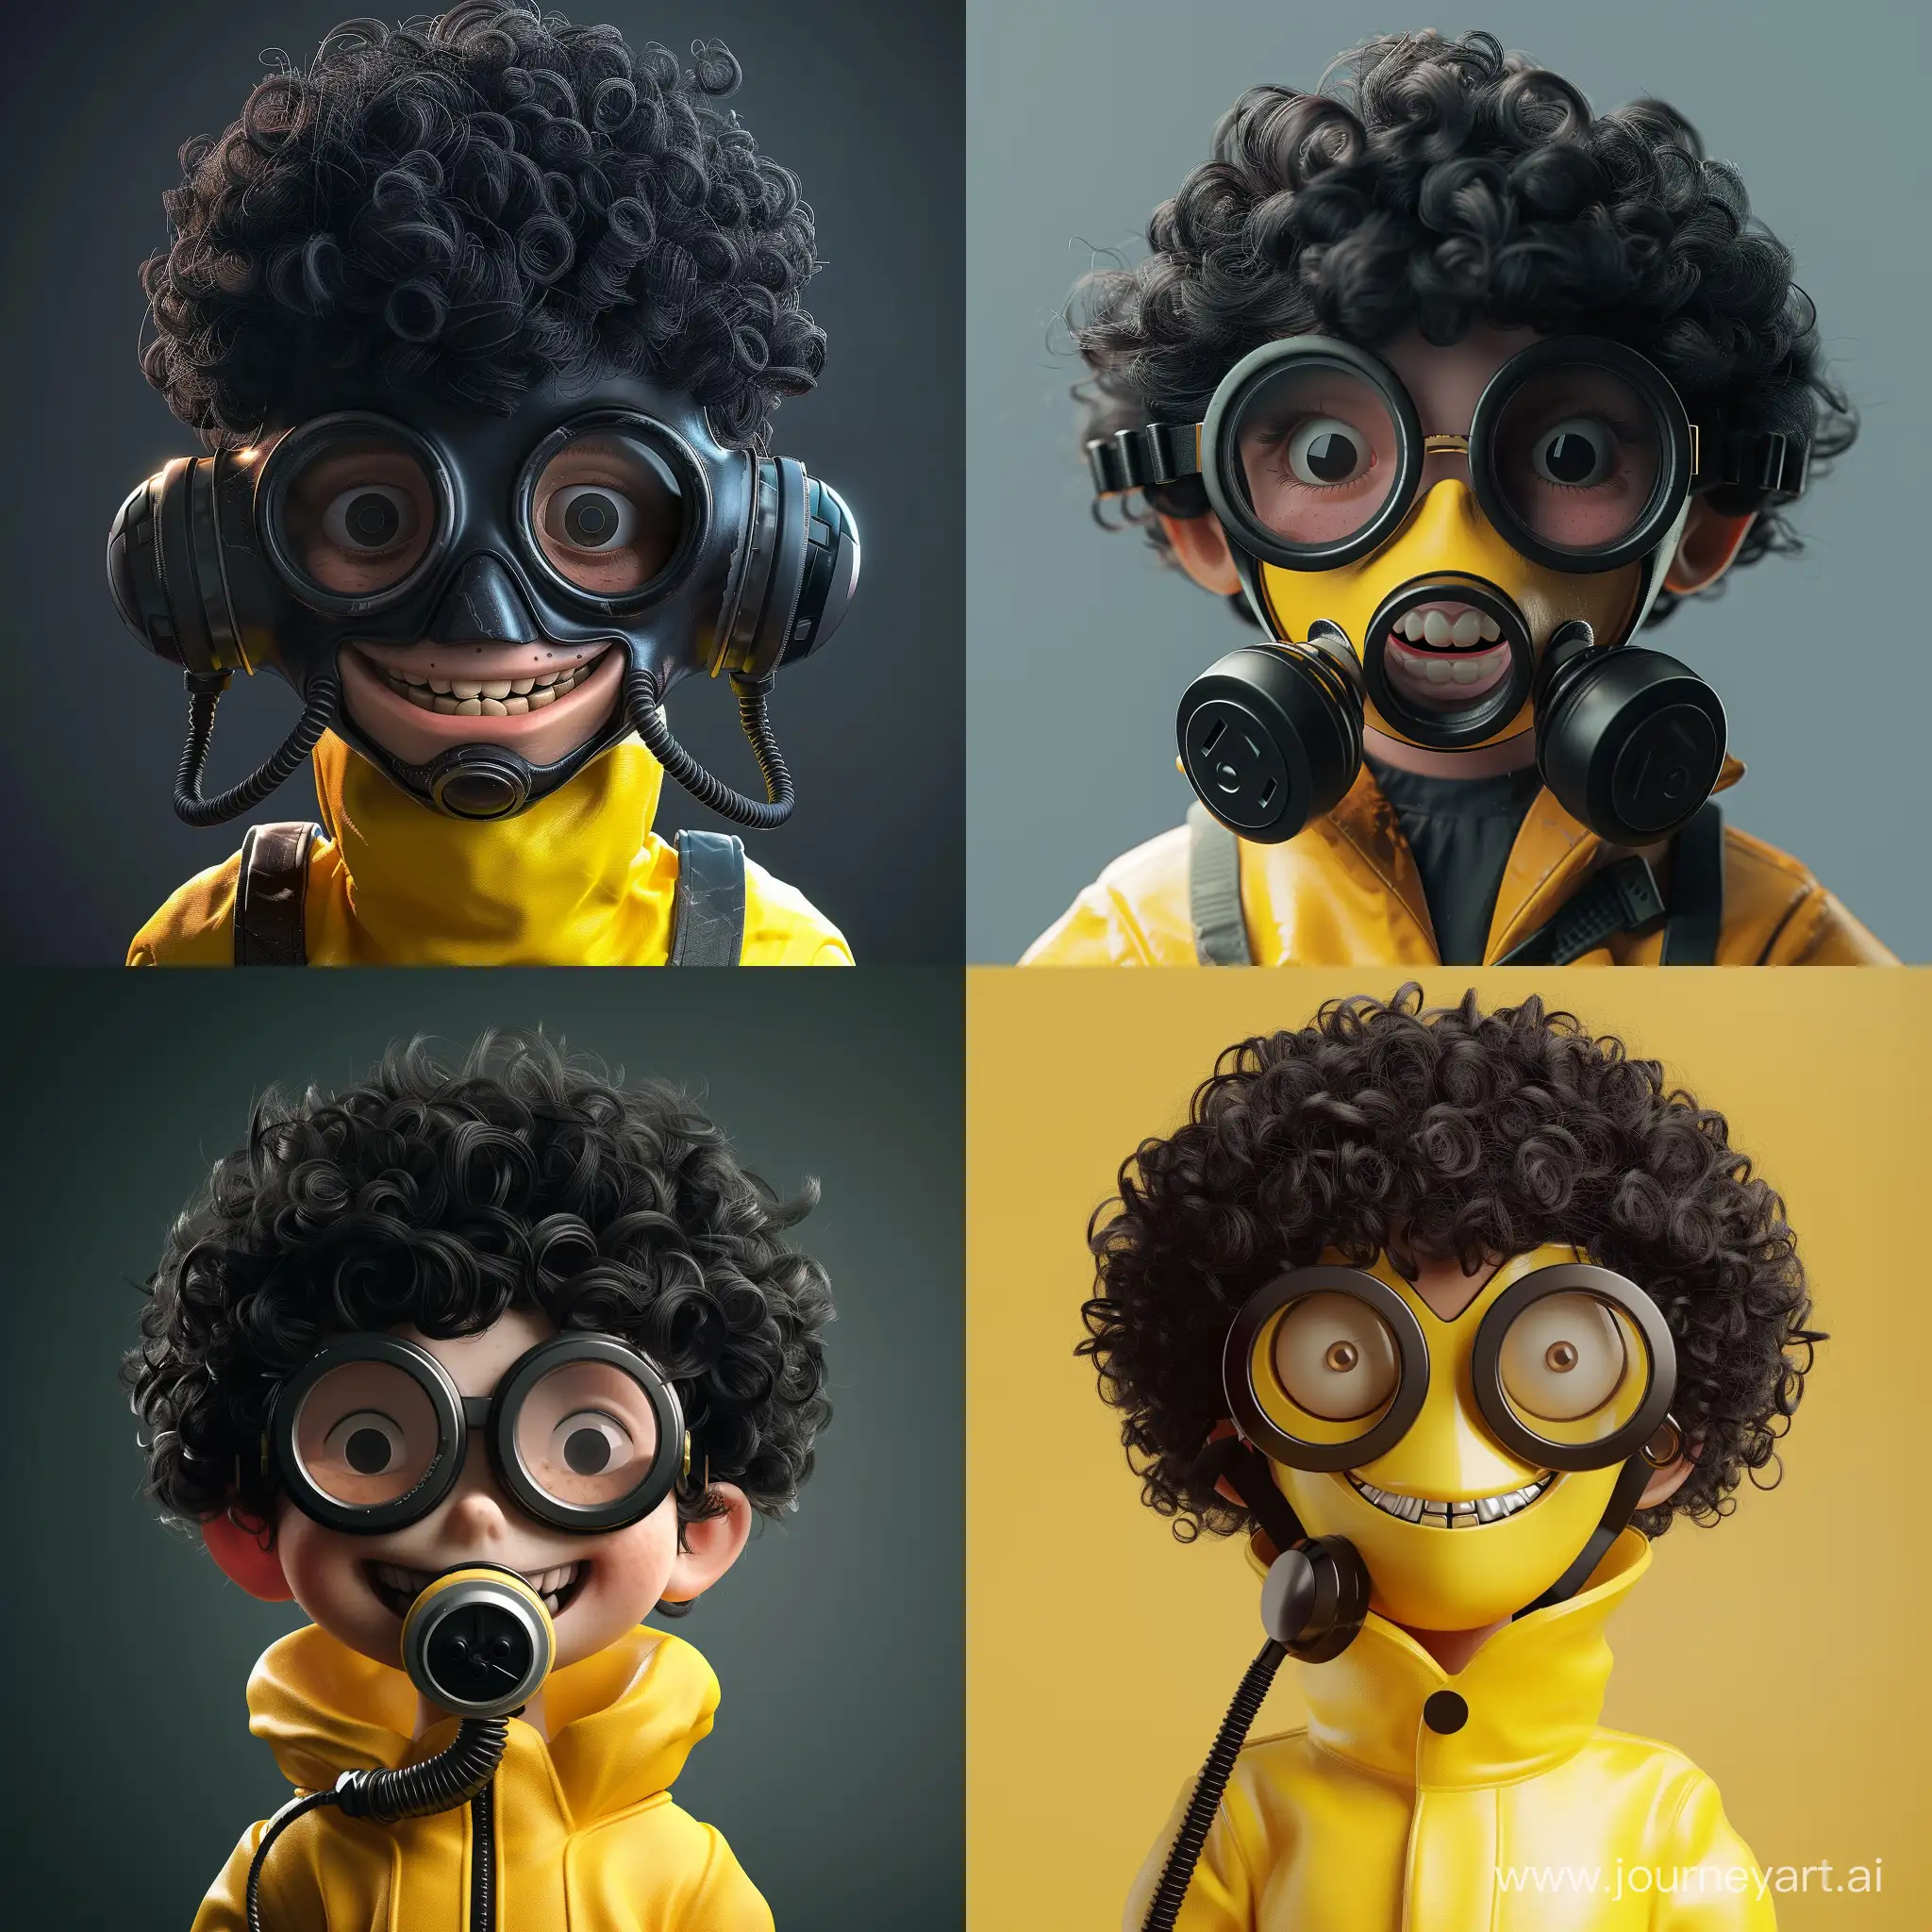 Smiling-Boy-in-Black-Glasses-and-Yellow-Protective-Suit-with-Gas-Mask